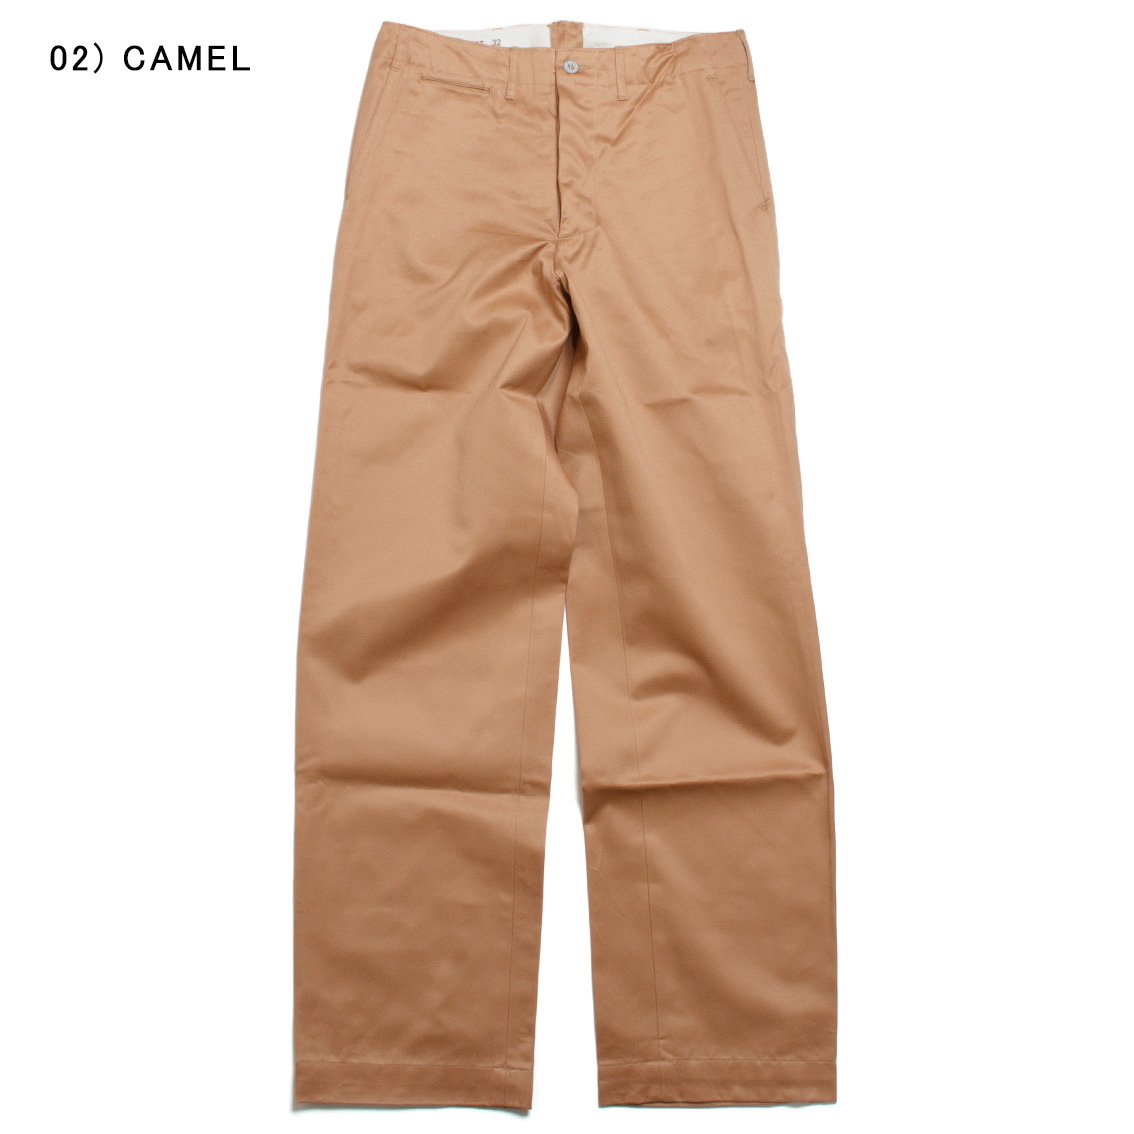 BUZZ RICKSON'S / バズリクソンズ] EARLY MILITARY CHINOS 1945 MODEL 